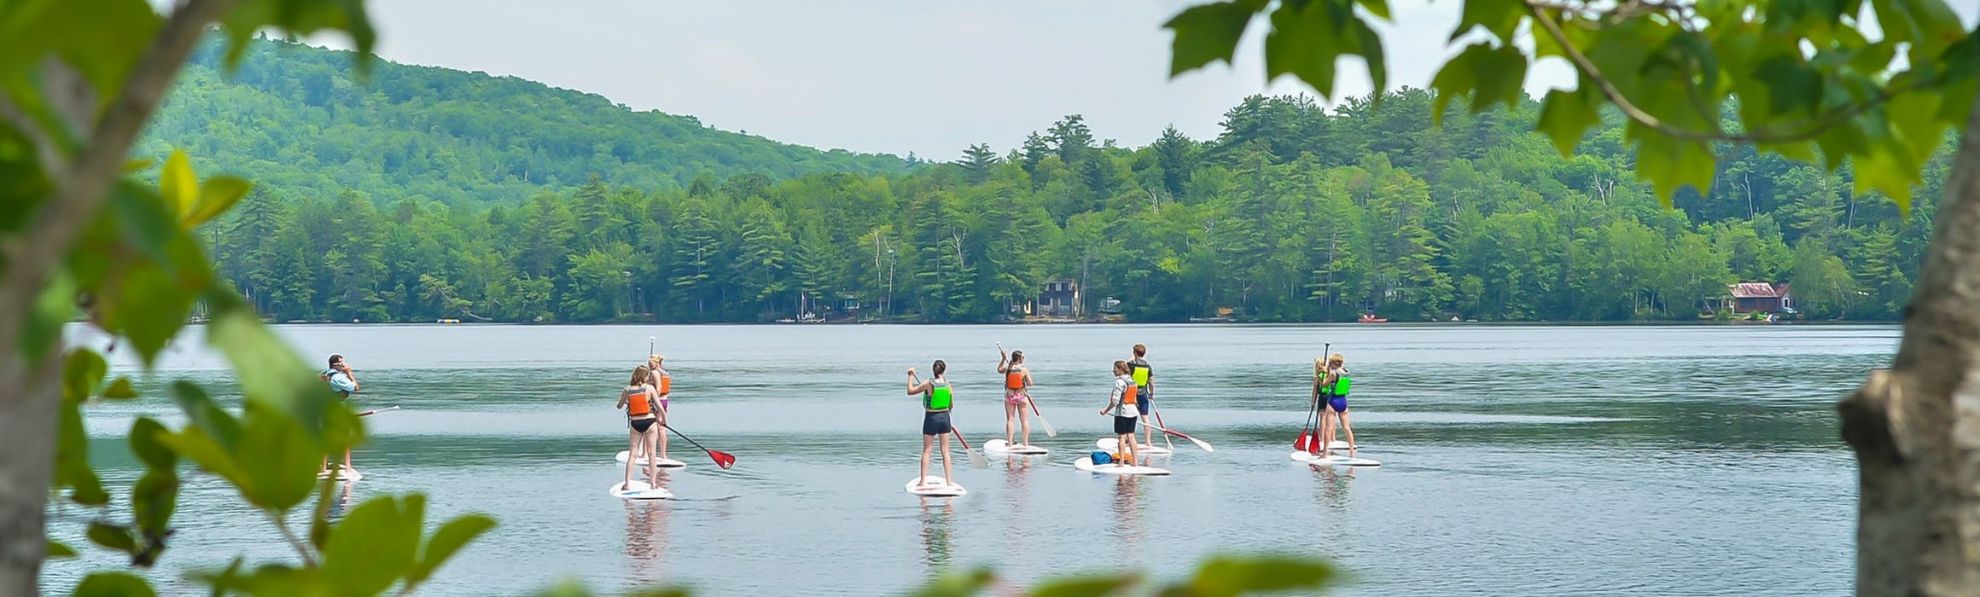 Stand UP Paddle Board Participants